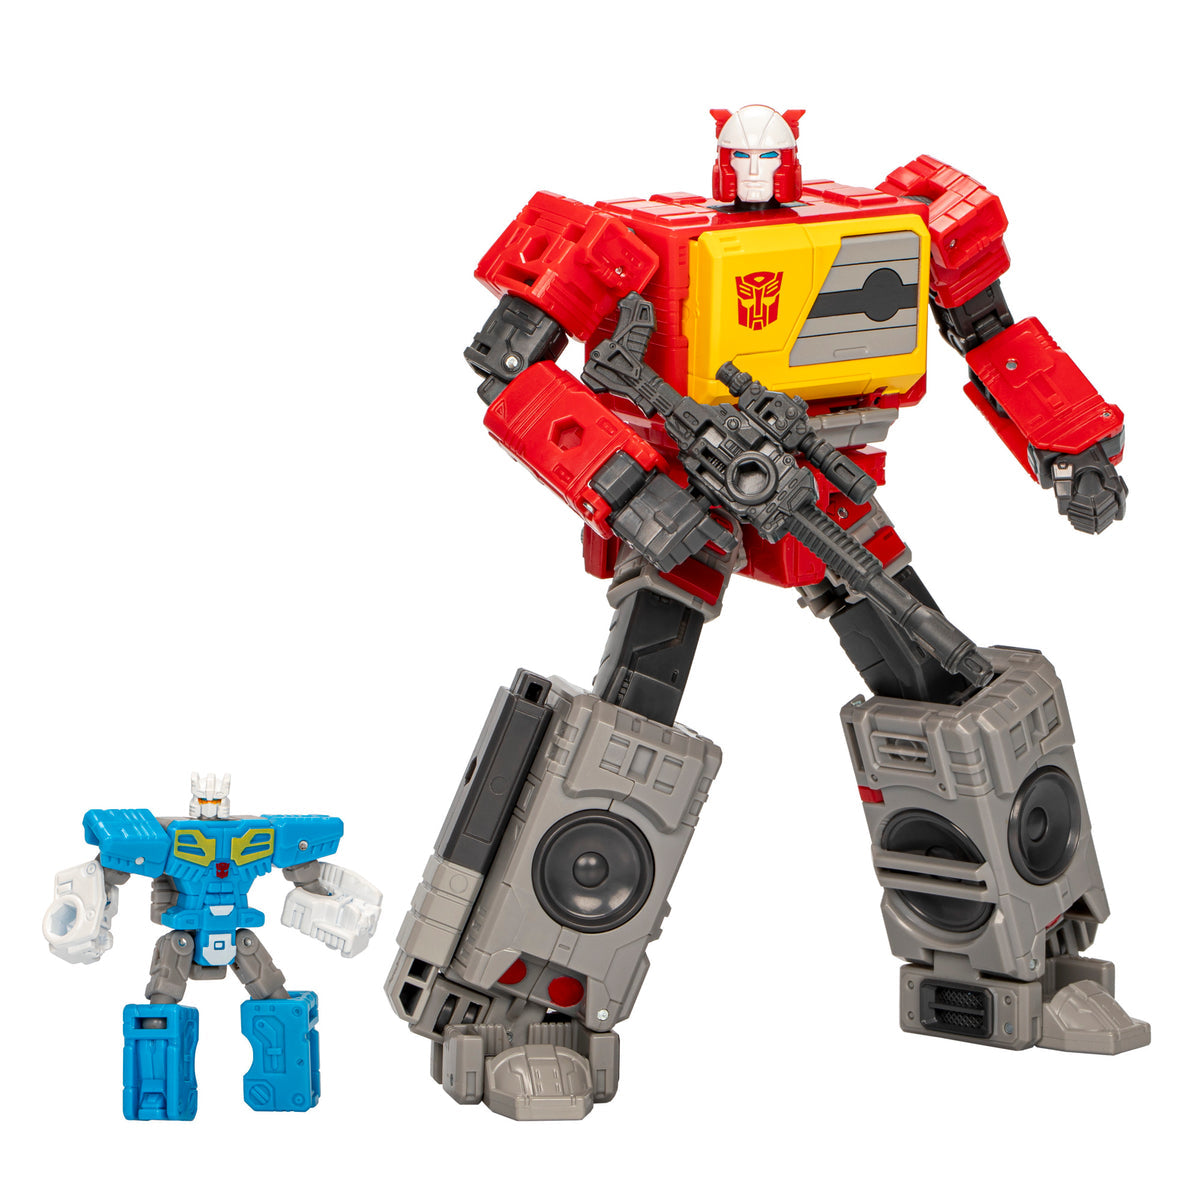 Hasbro - Transformers Generations - Studio Series - Voyager - Autobot Blaster & Eject - Marvelous Toys